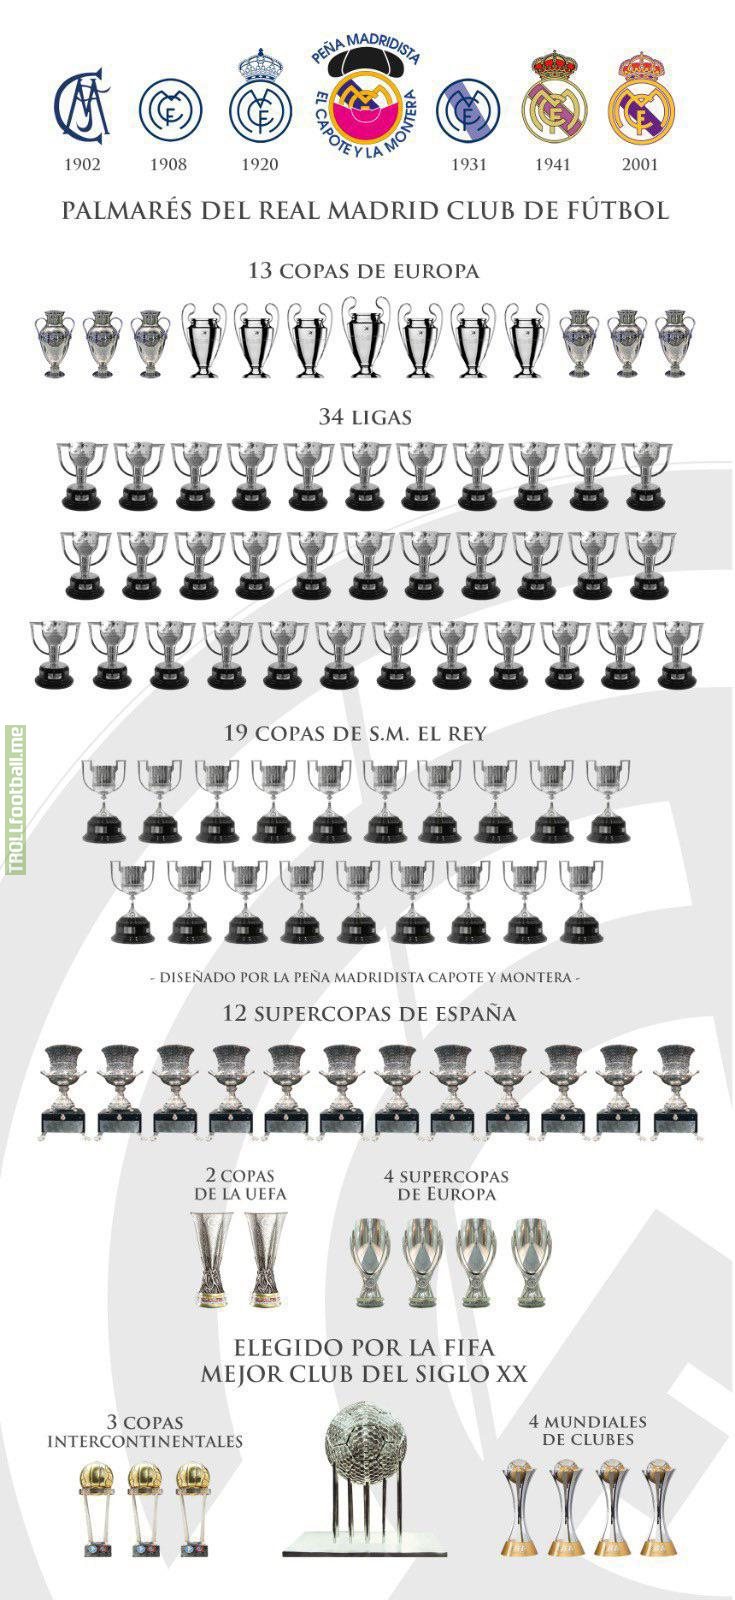 Real Madrid's trophy cabinet